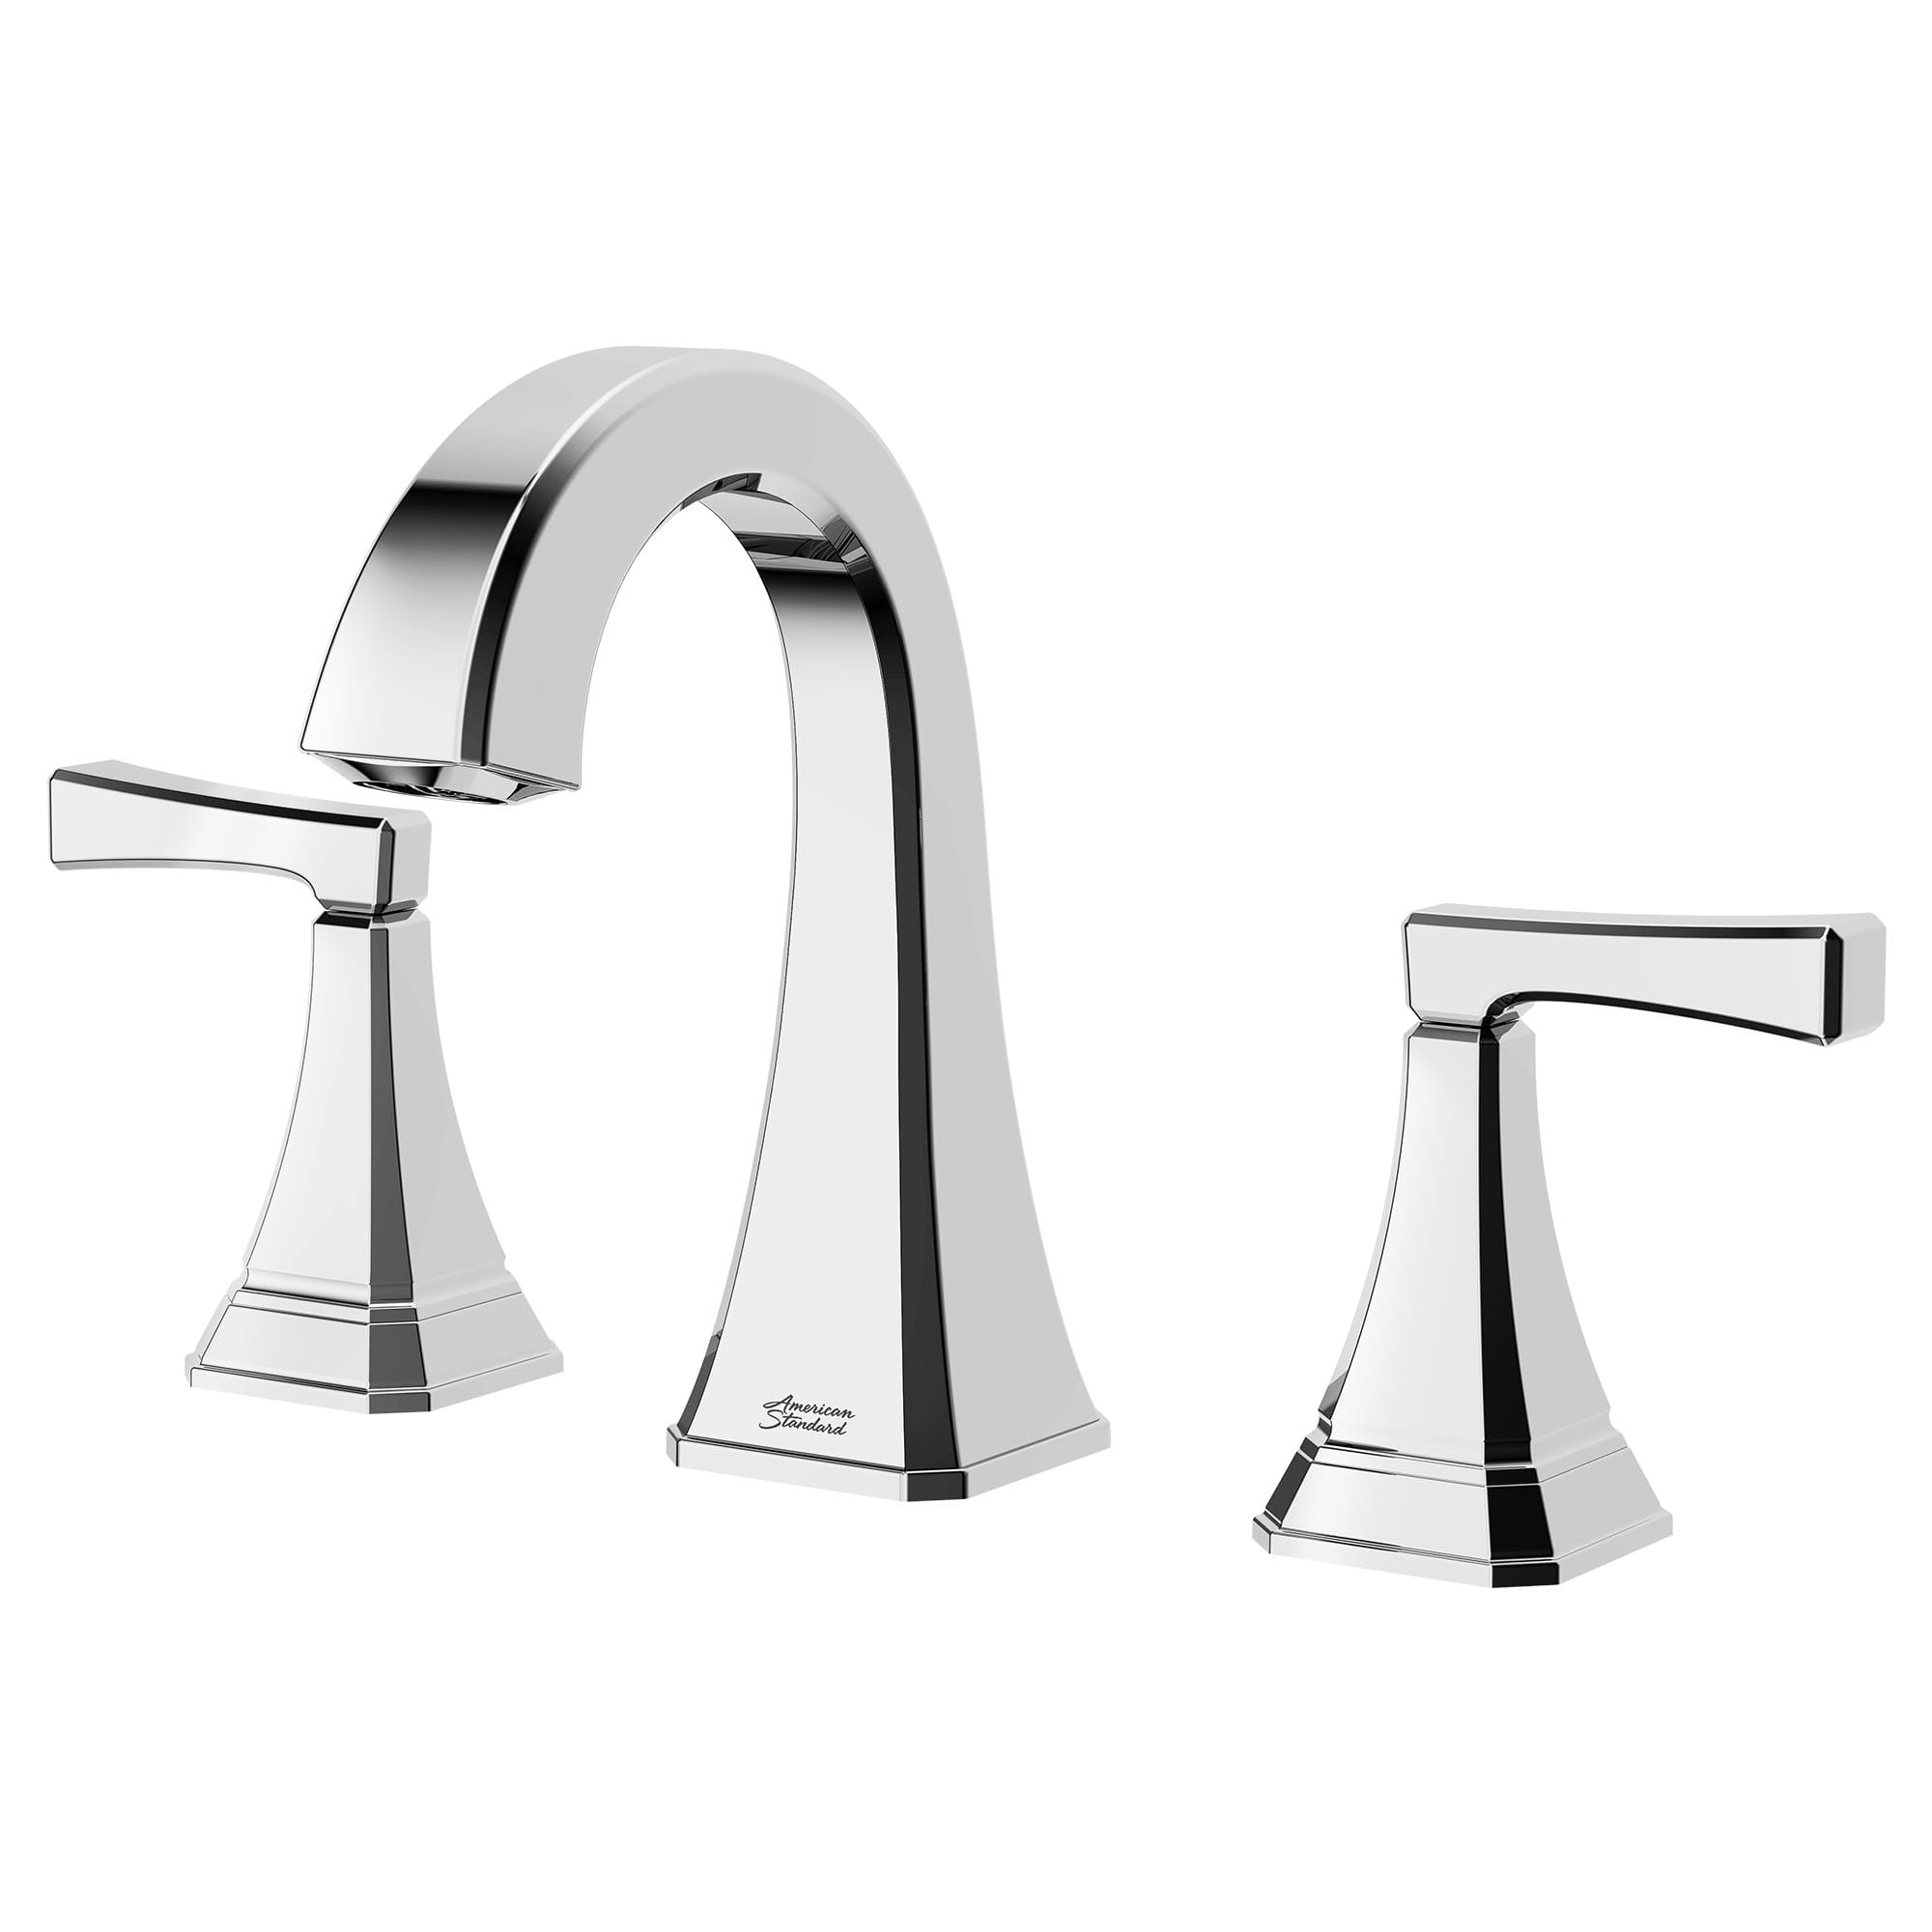 Westerly 8-In. Widespread 2-Handle Bathroom Faucet 1.2 GPM with Lever Handles